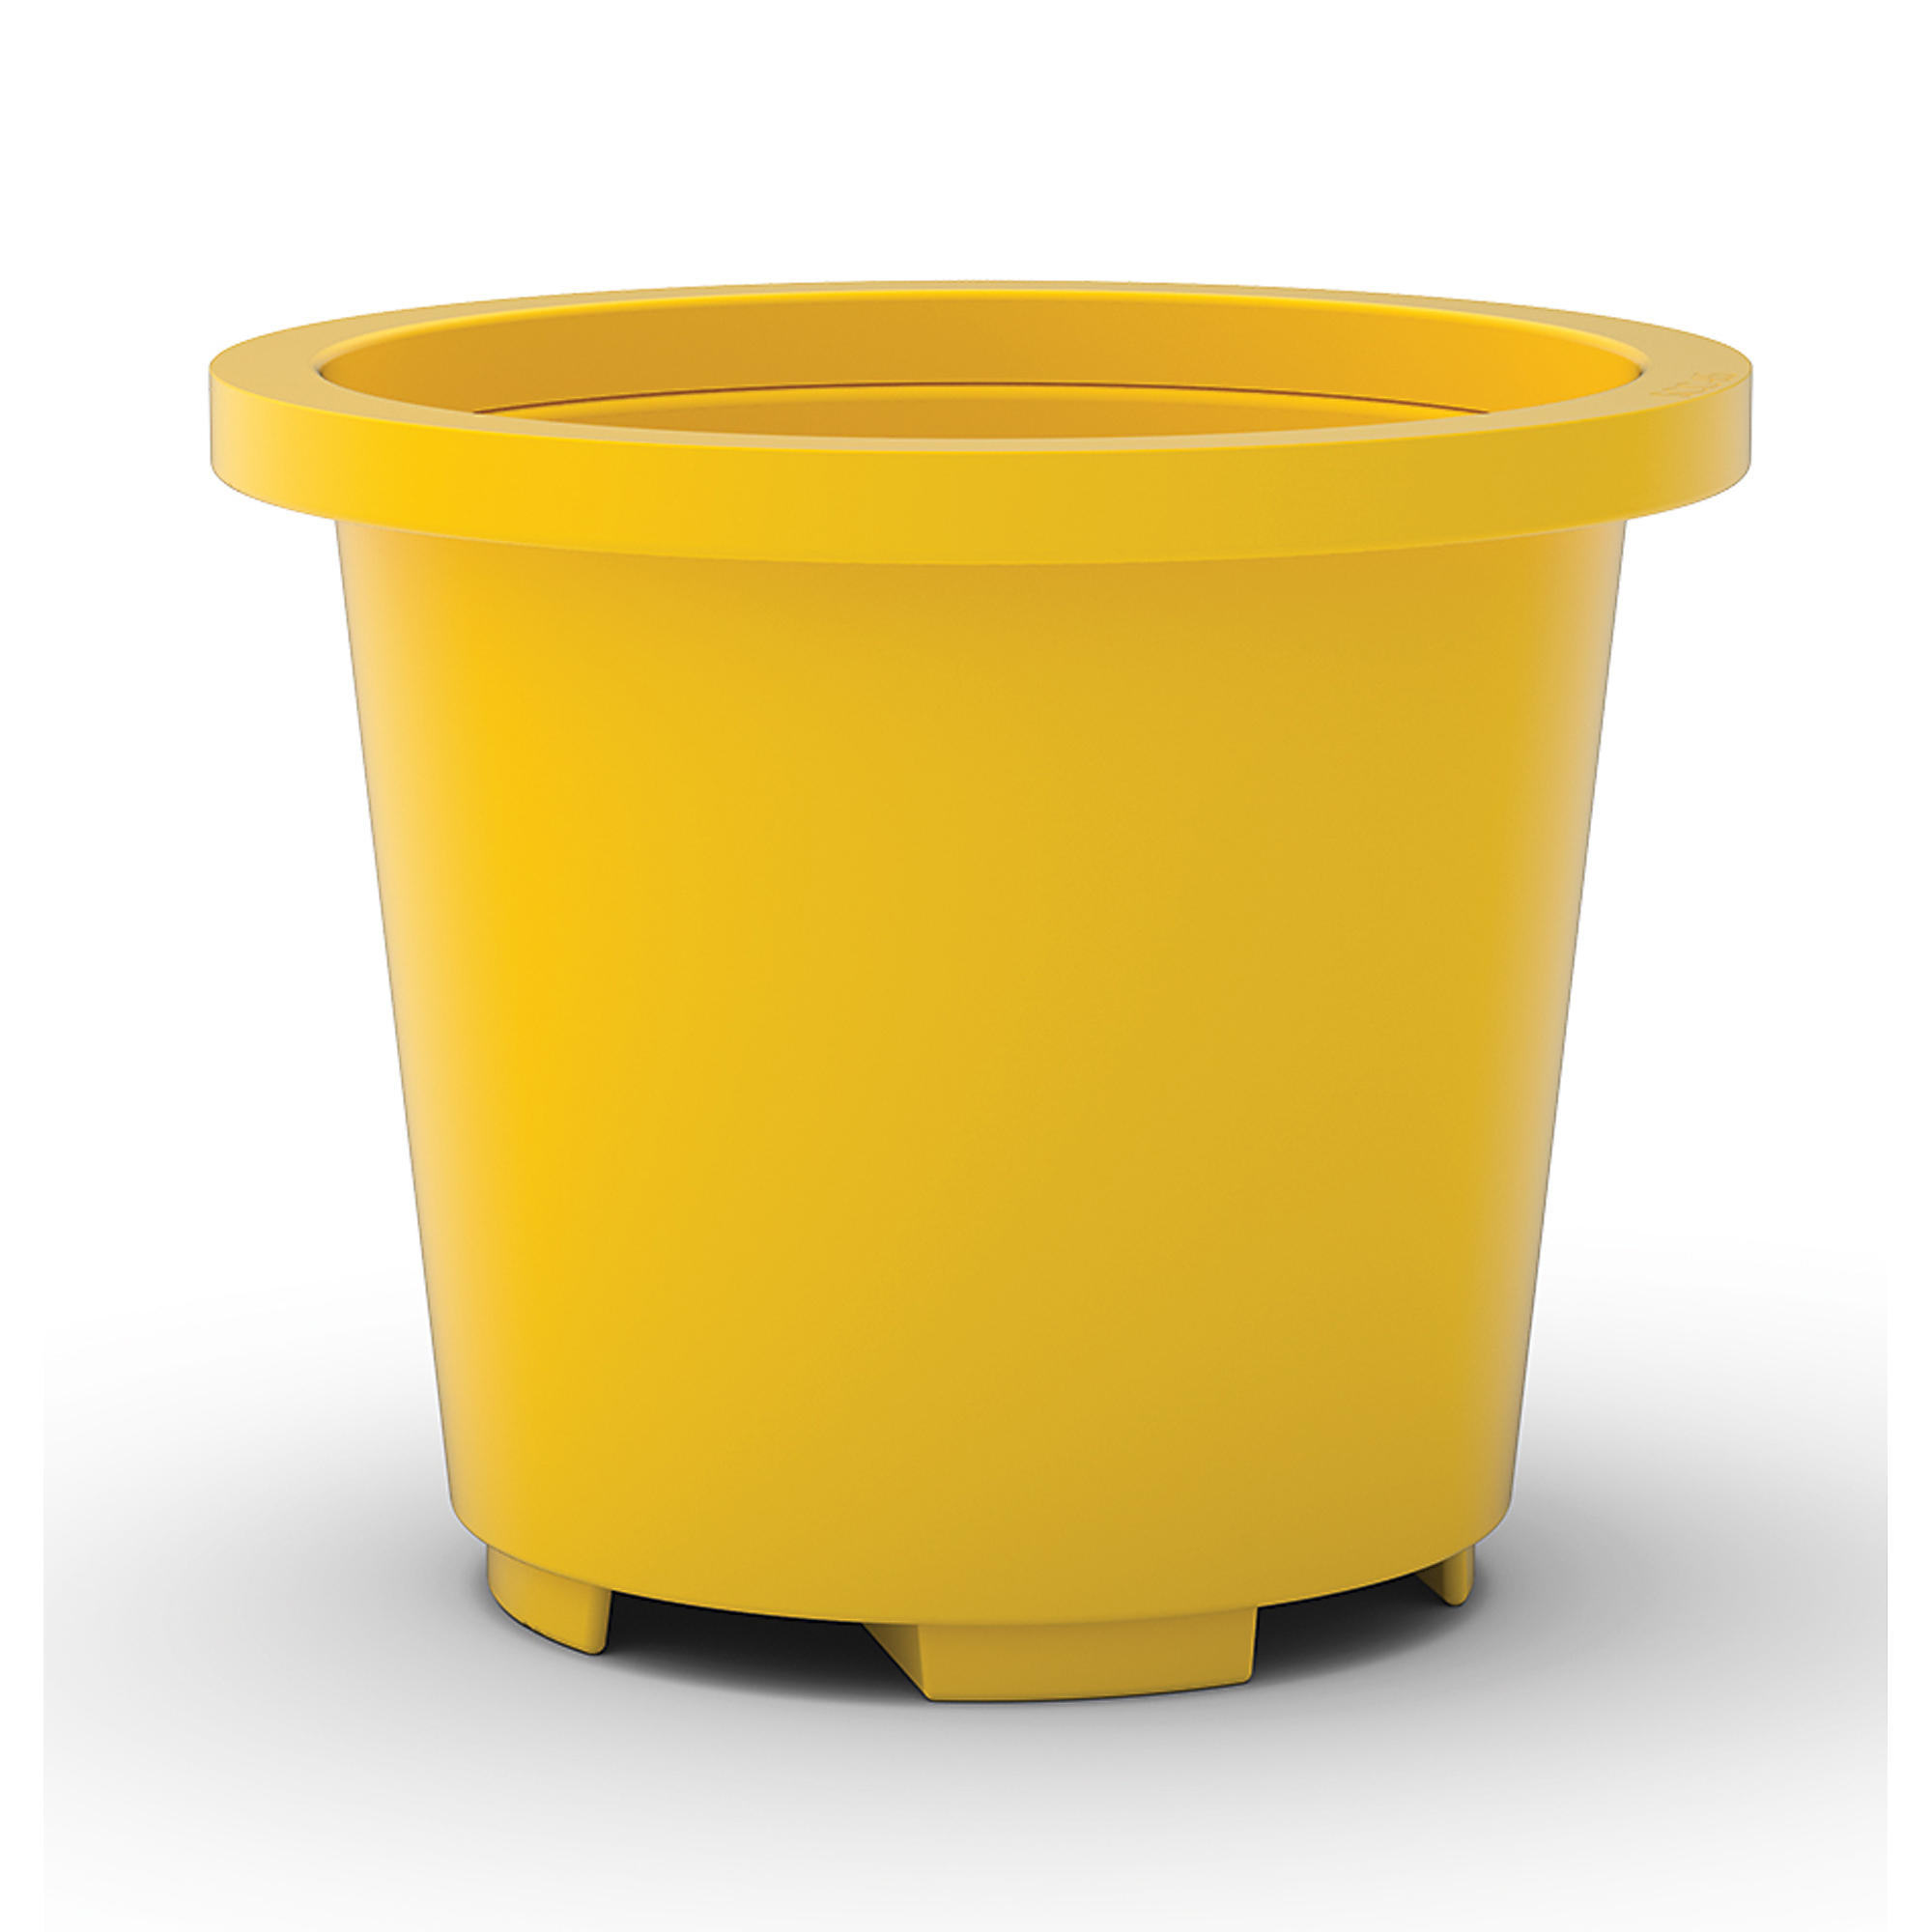 Vestil, Drum Containment Container Yellow, Length 36.25 in, Width 36.25 in, Height 29.5 in, Model SCC-65-YL